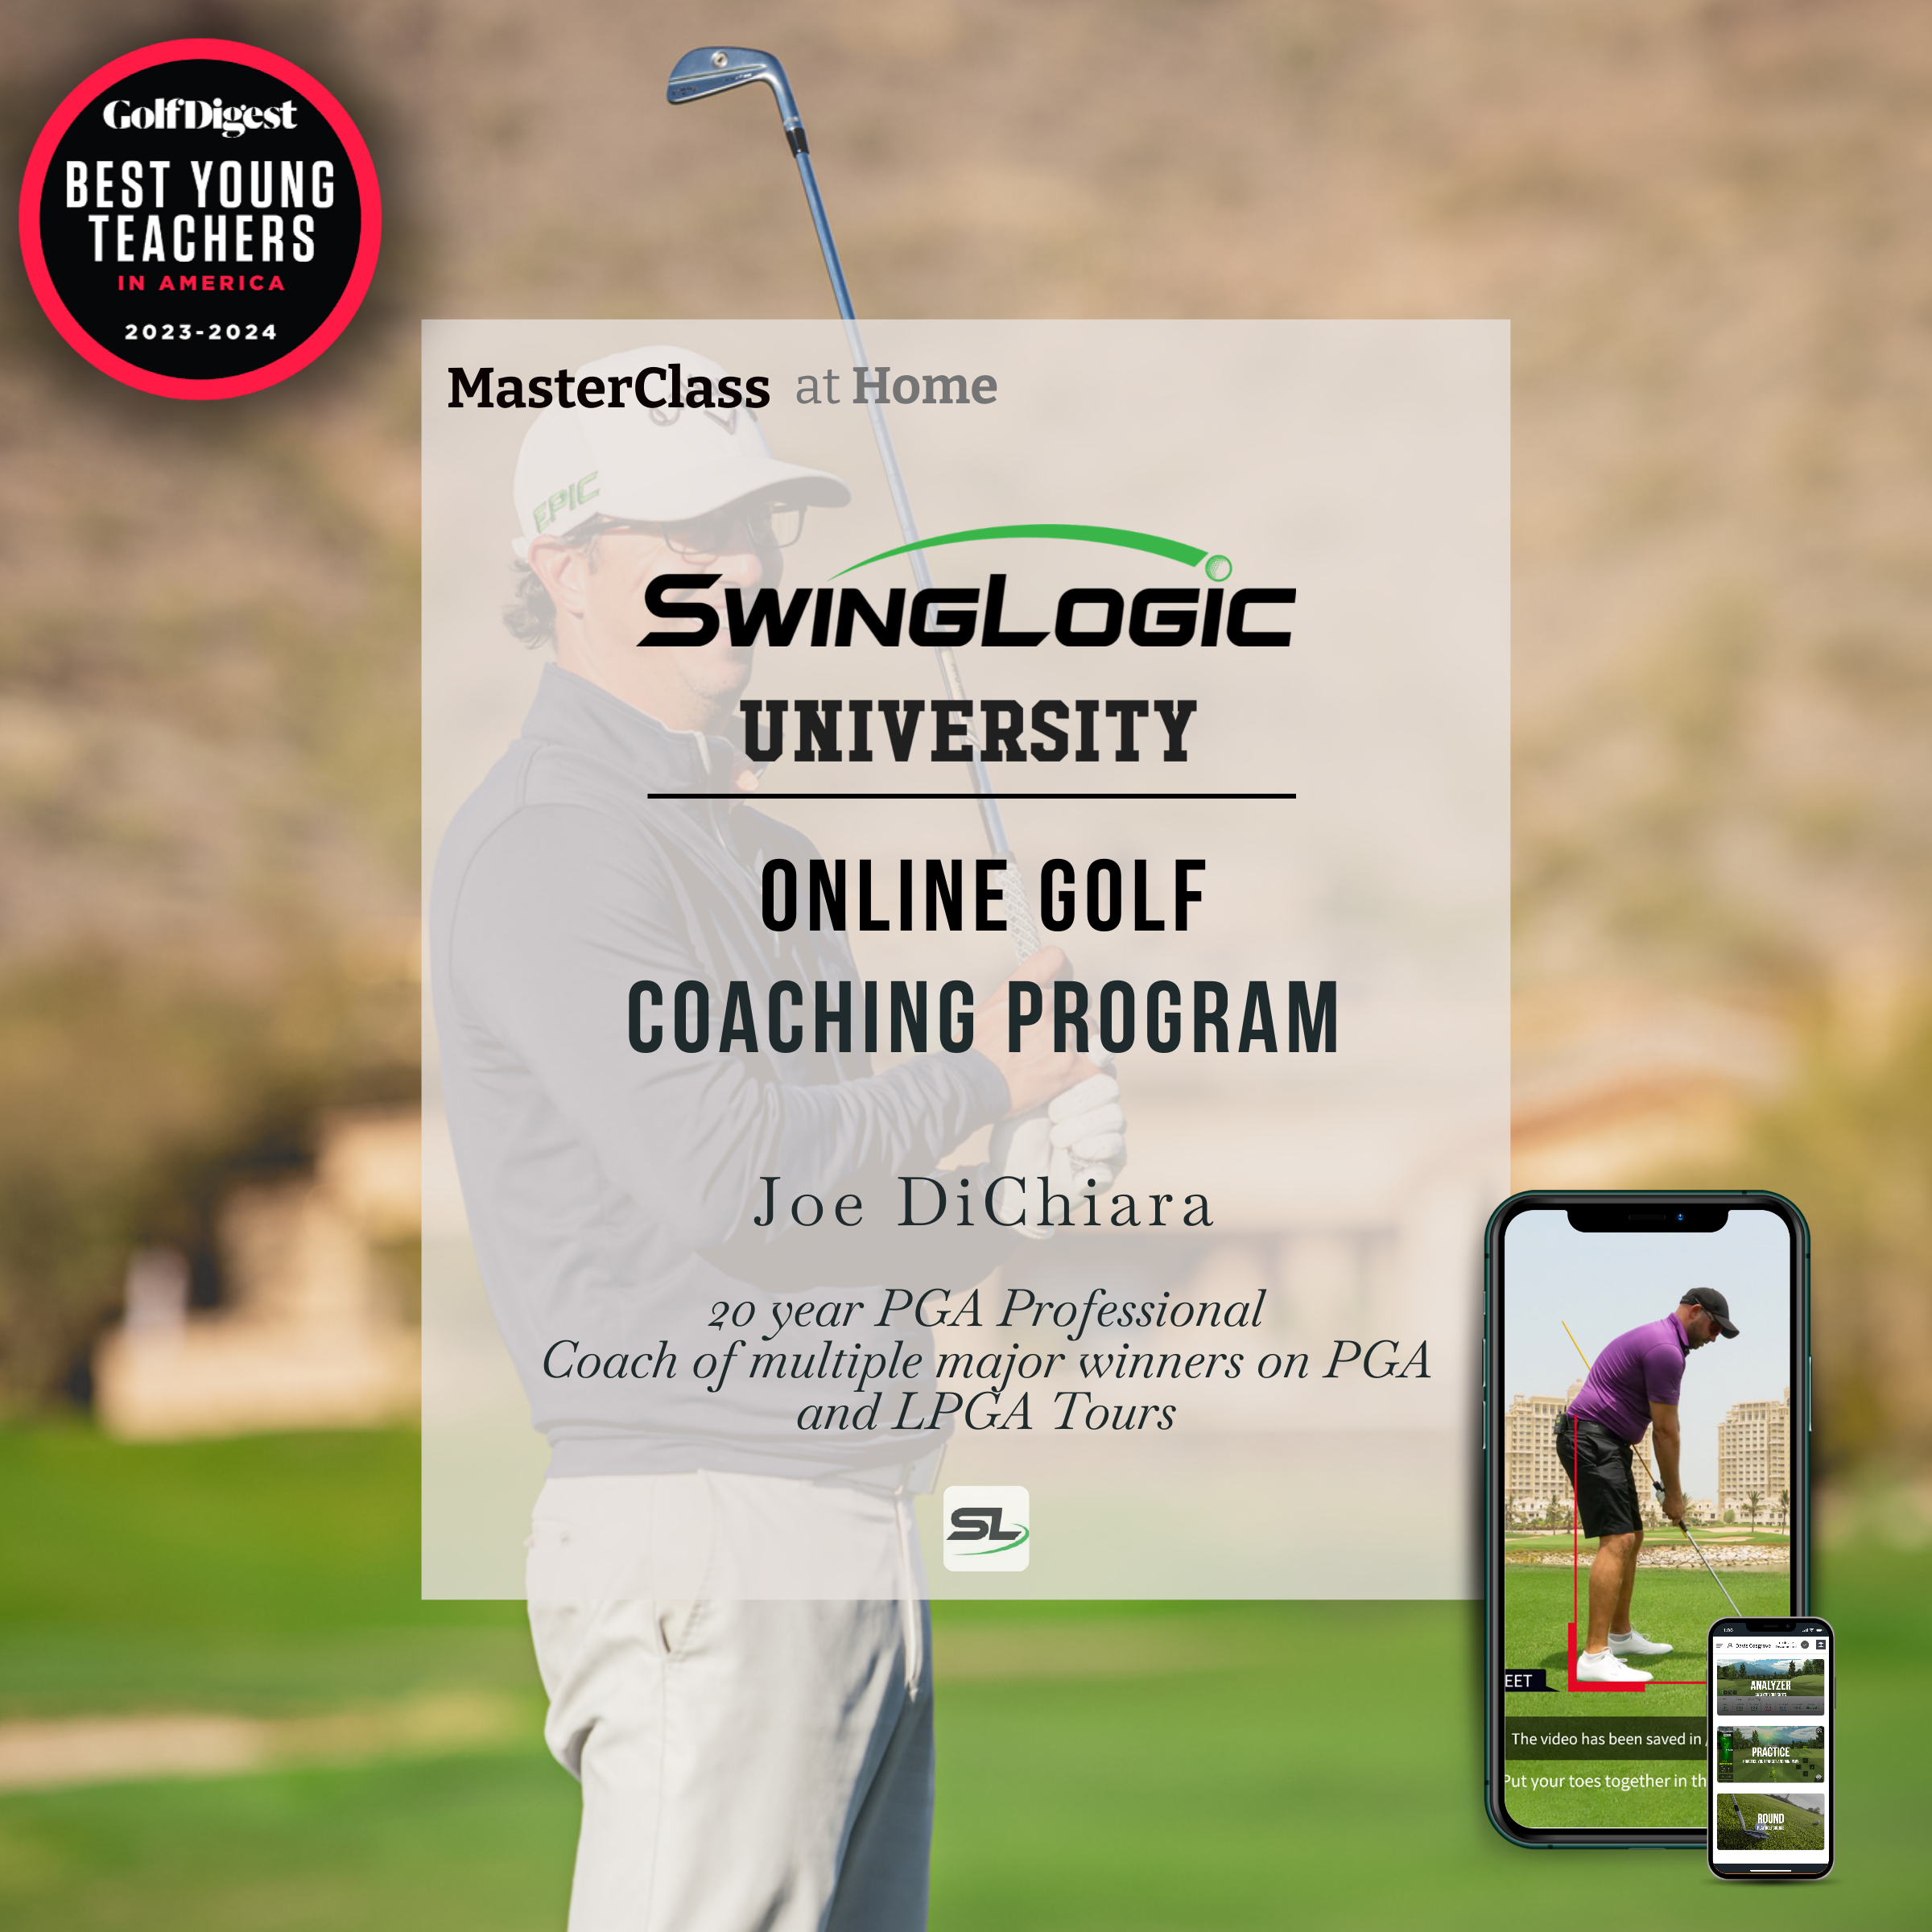 Advertisement for 'SwingLogic University Online Golf Coaching Program' with text overlay and golfer image.